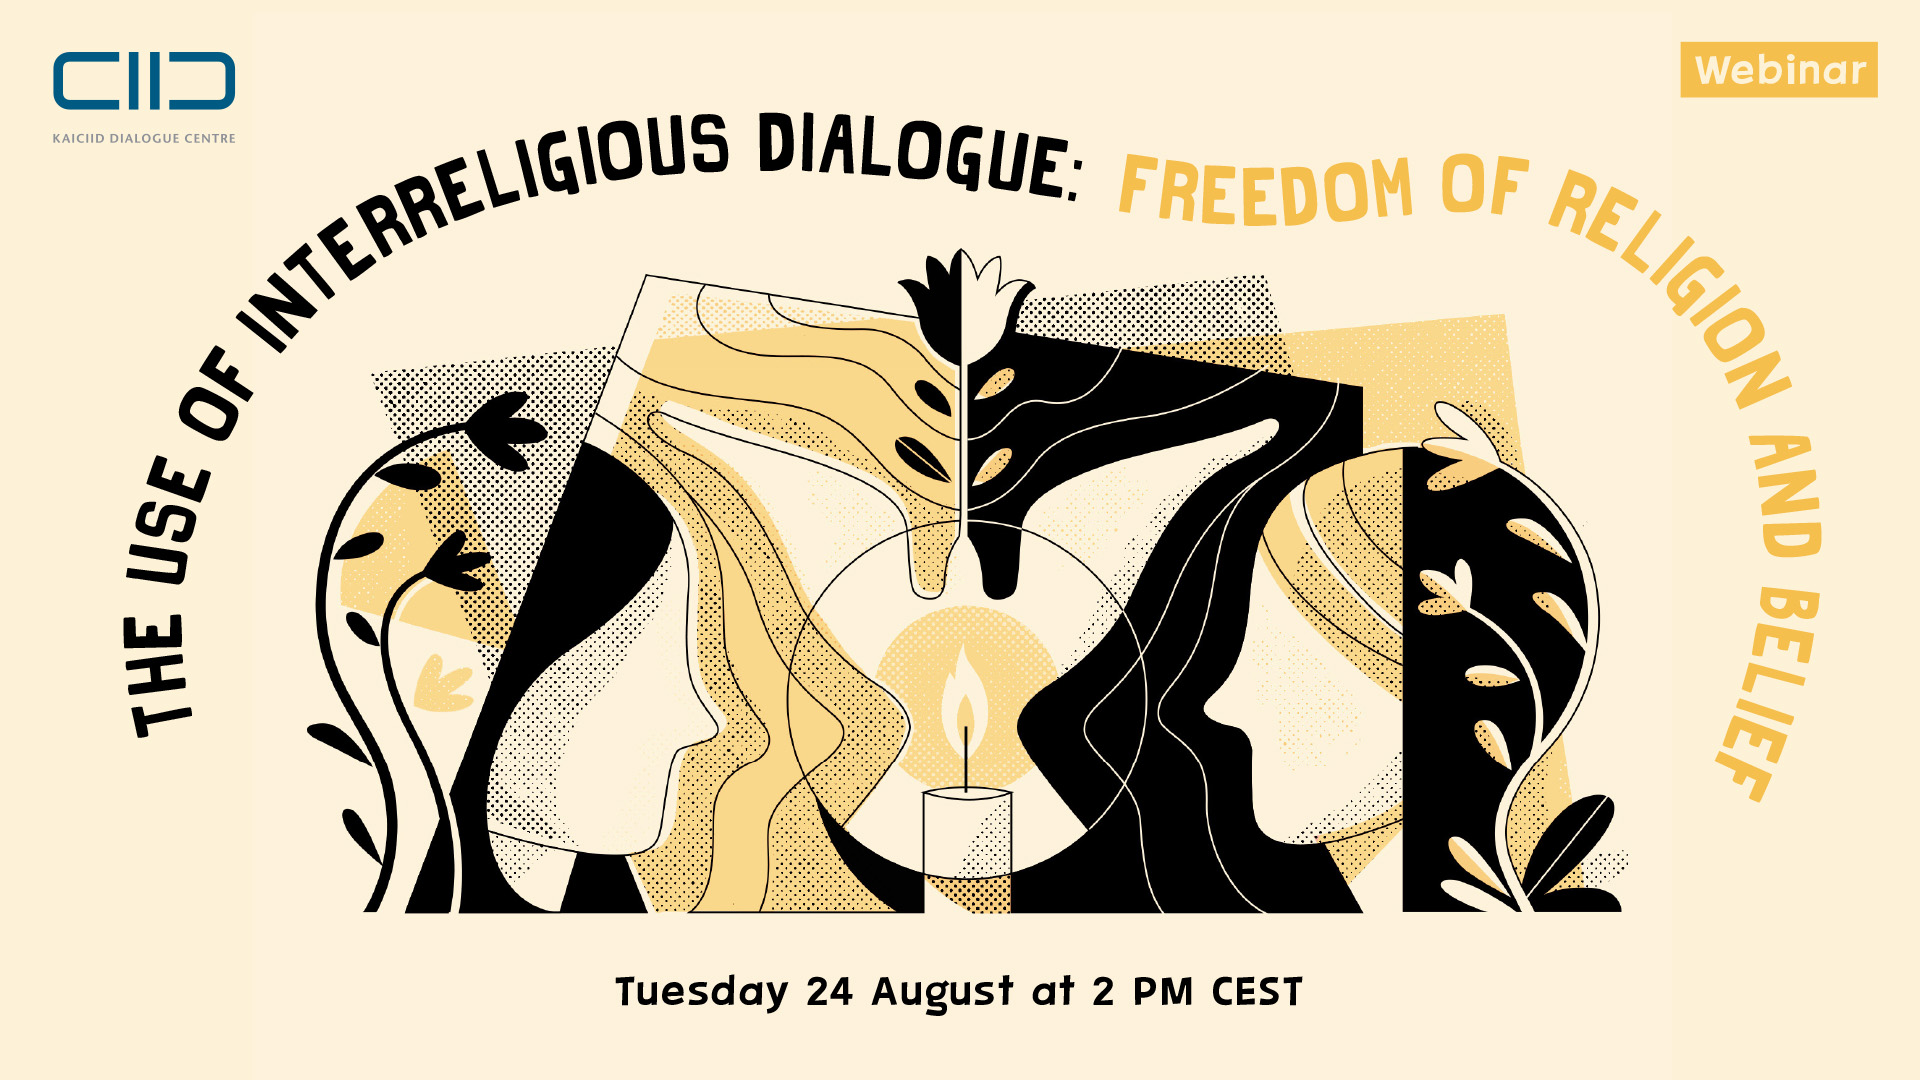 THE USE OF INTERRELIGIOUS DIALOGUE:  FREEDOM OF RELIGION AND BELIEF